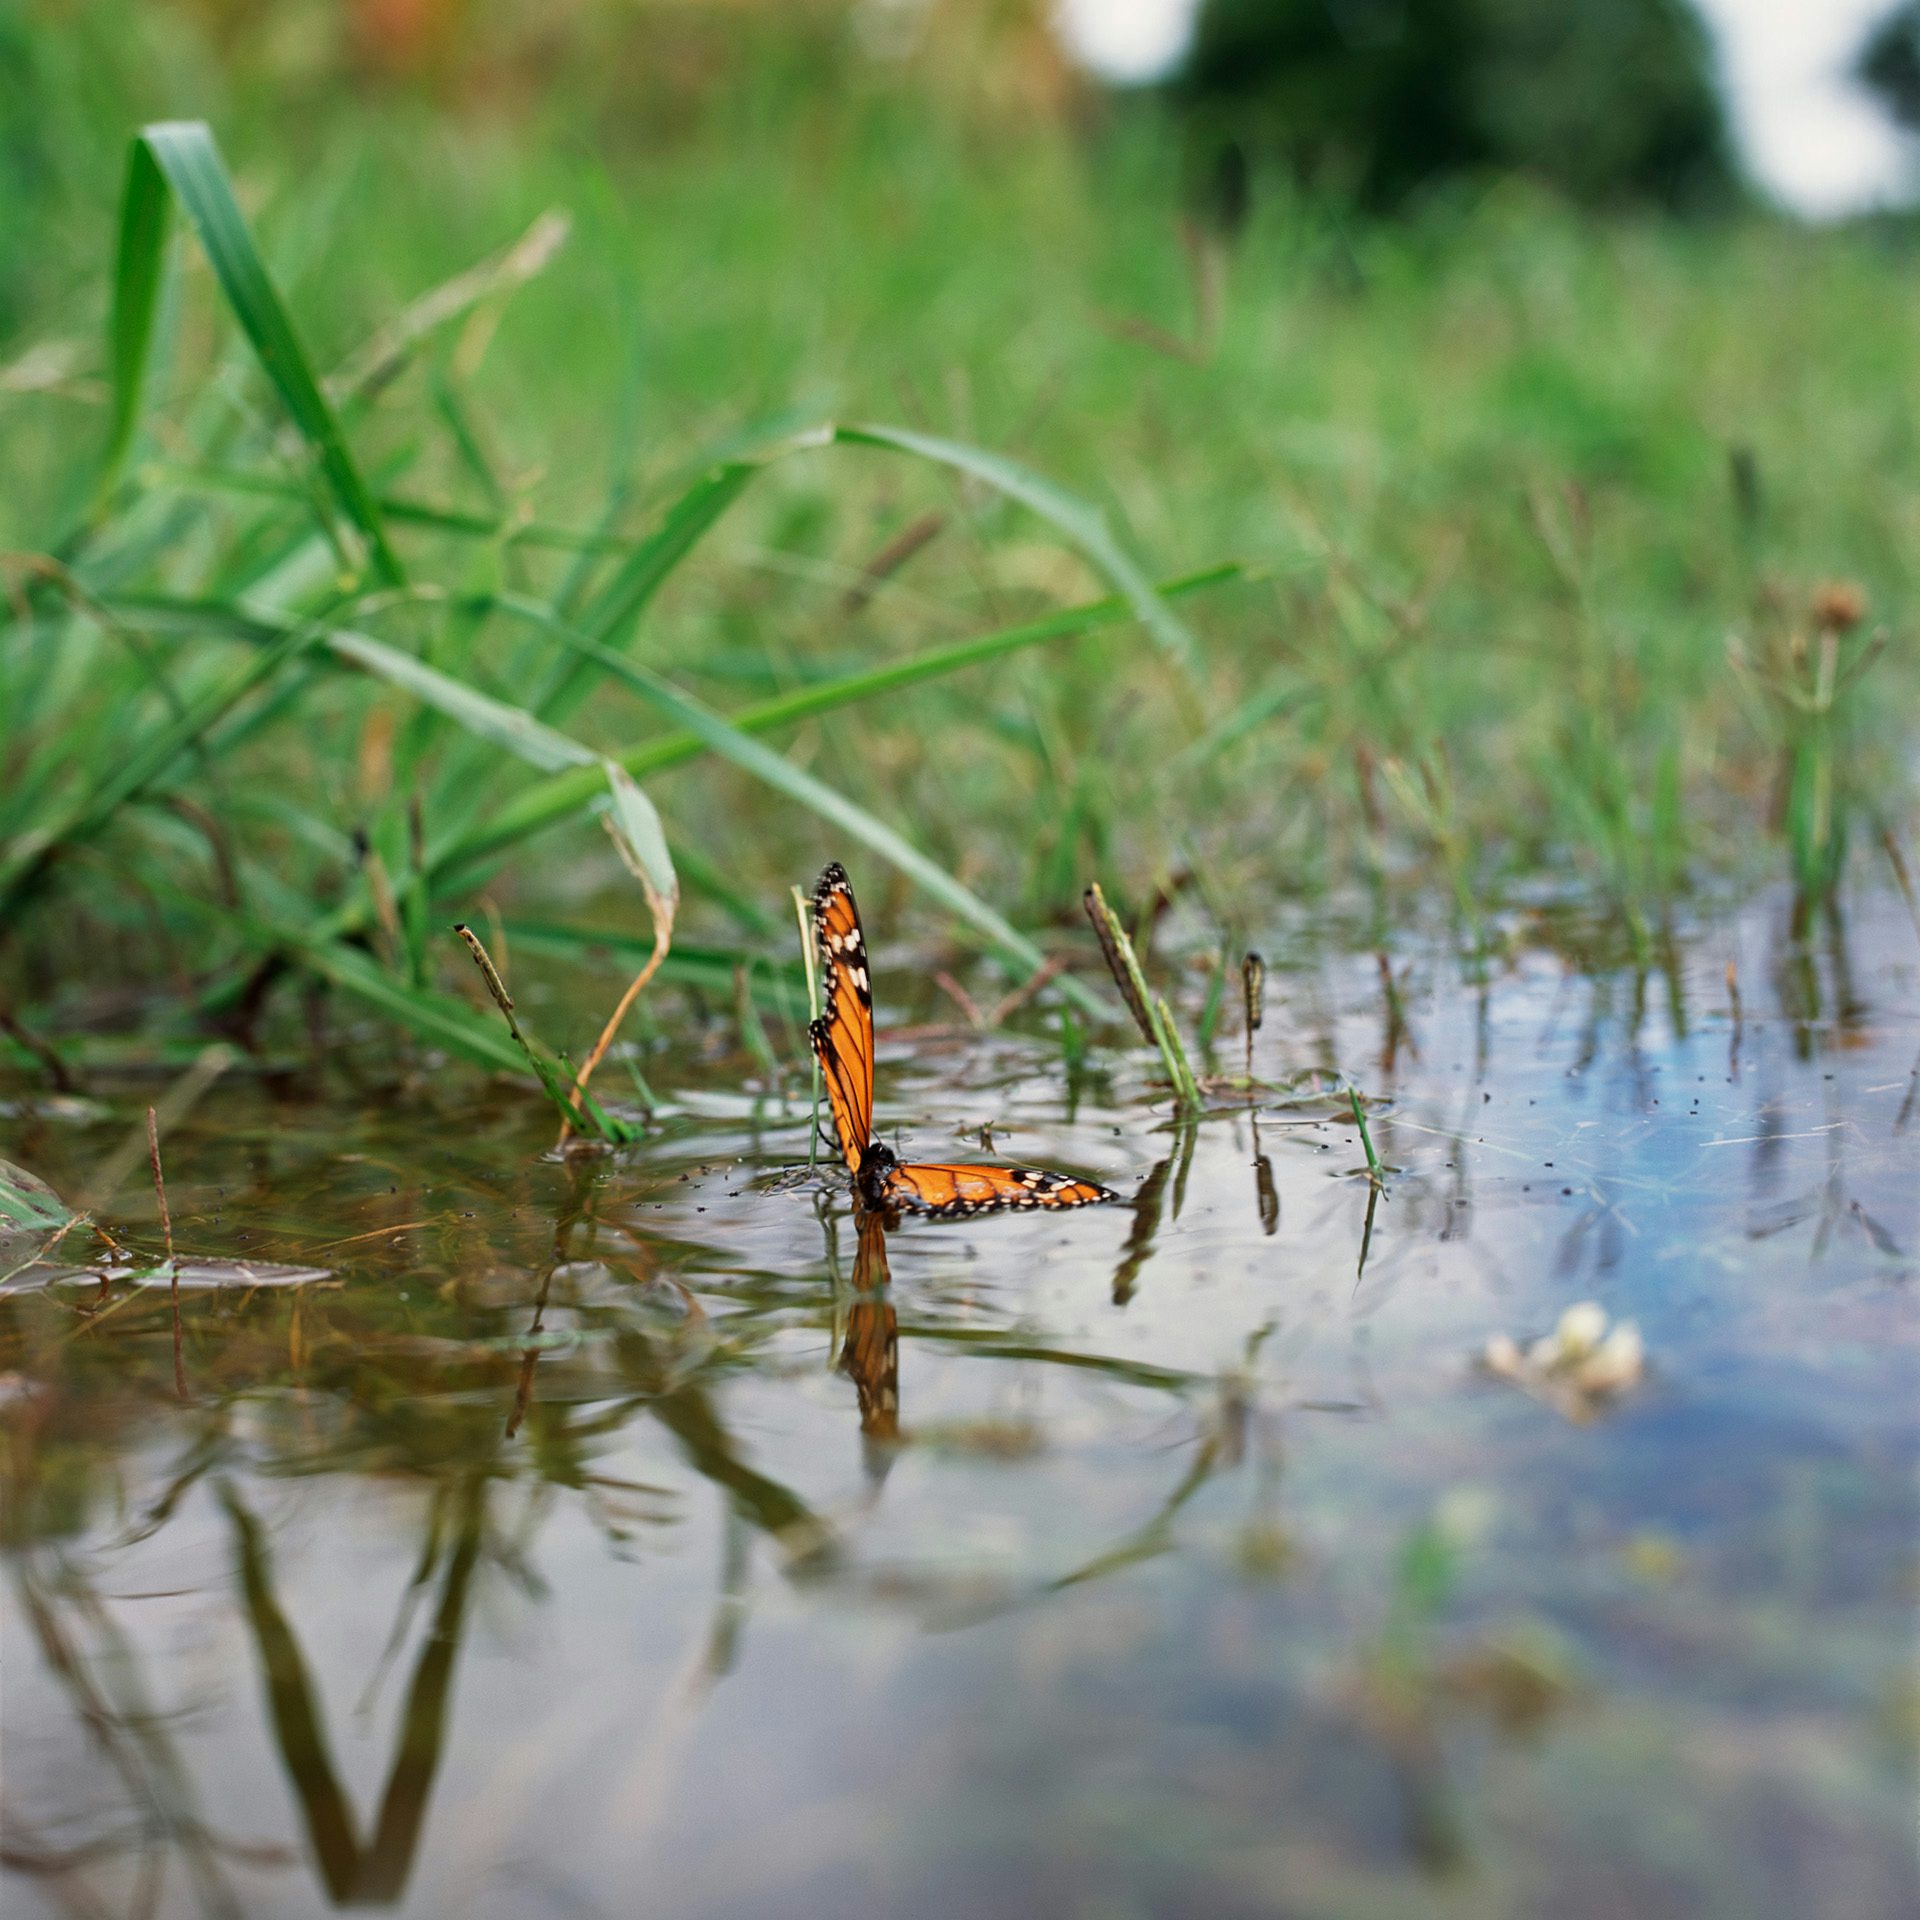 Photograph by Alessandra Sanguinetti of a red and black butterfly on top of a grass-lined puddle, forming a right-angle with its wings